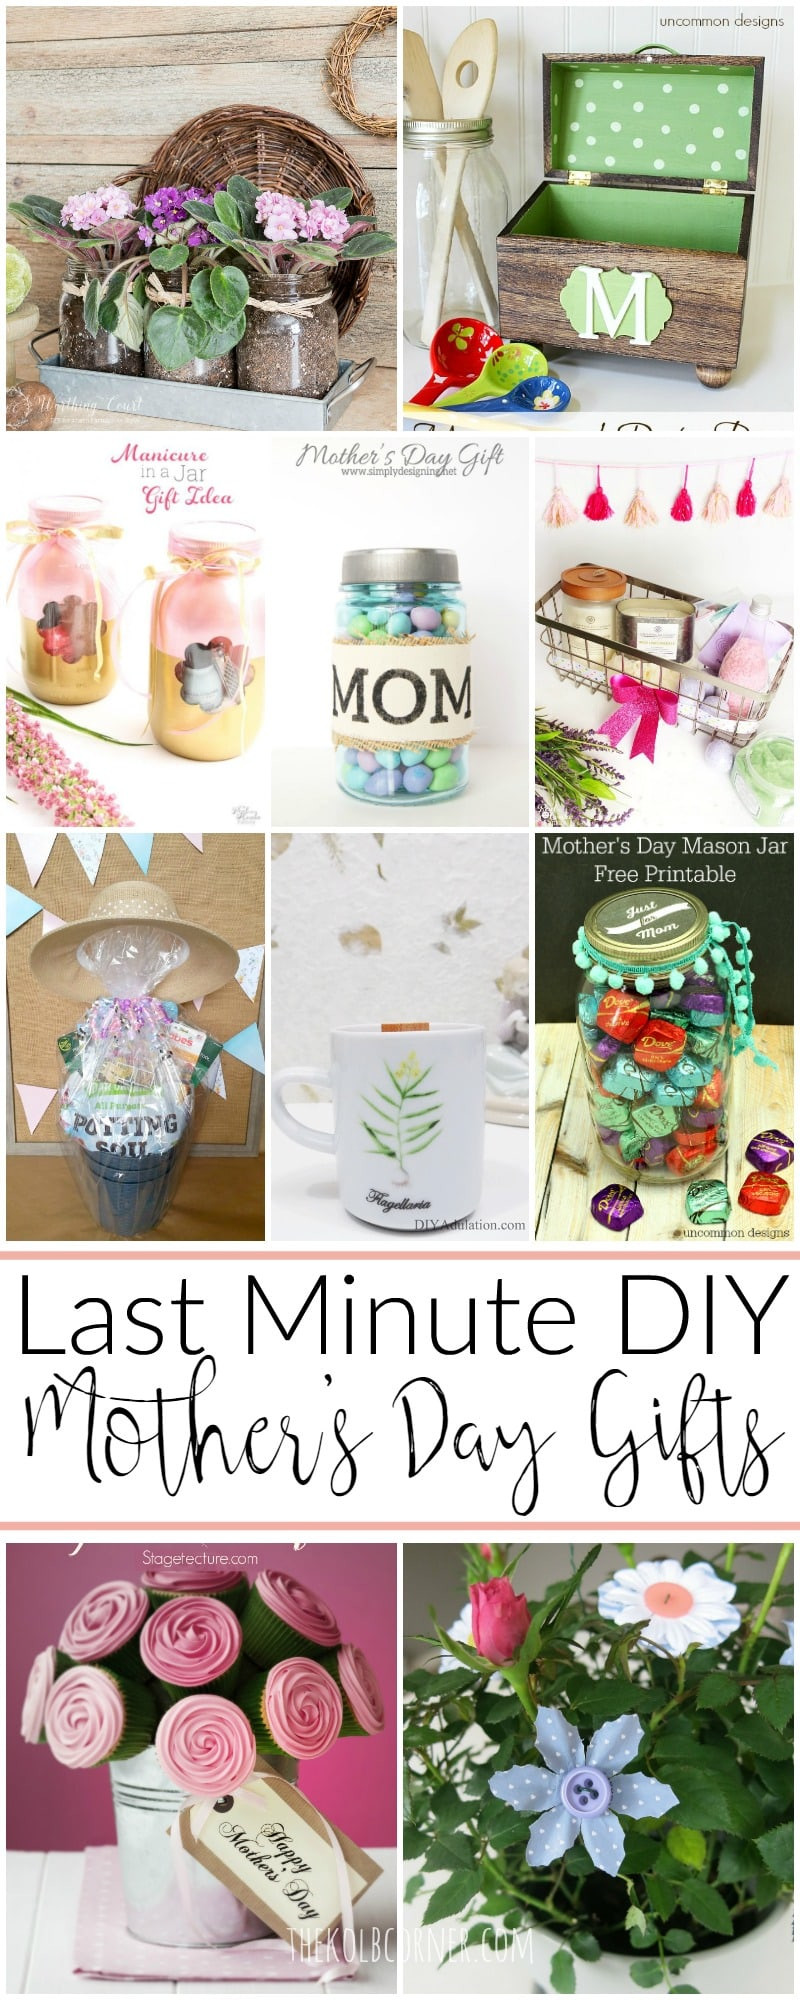 Last Minute Mother Day Gift Ideas
 Last Minute DIY Mother s Day Gift Ideas